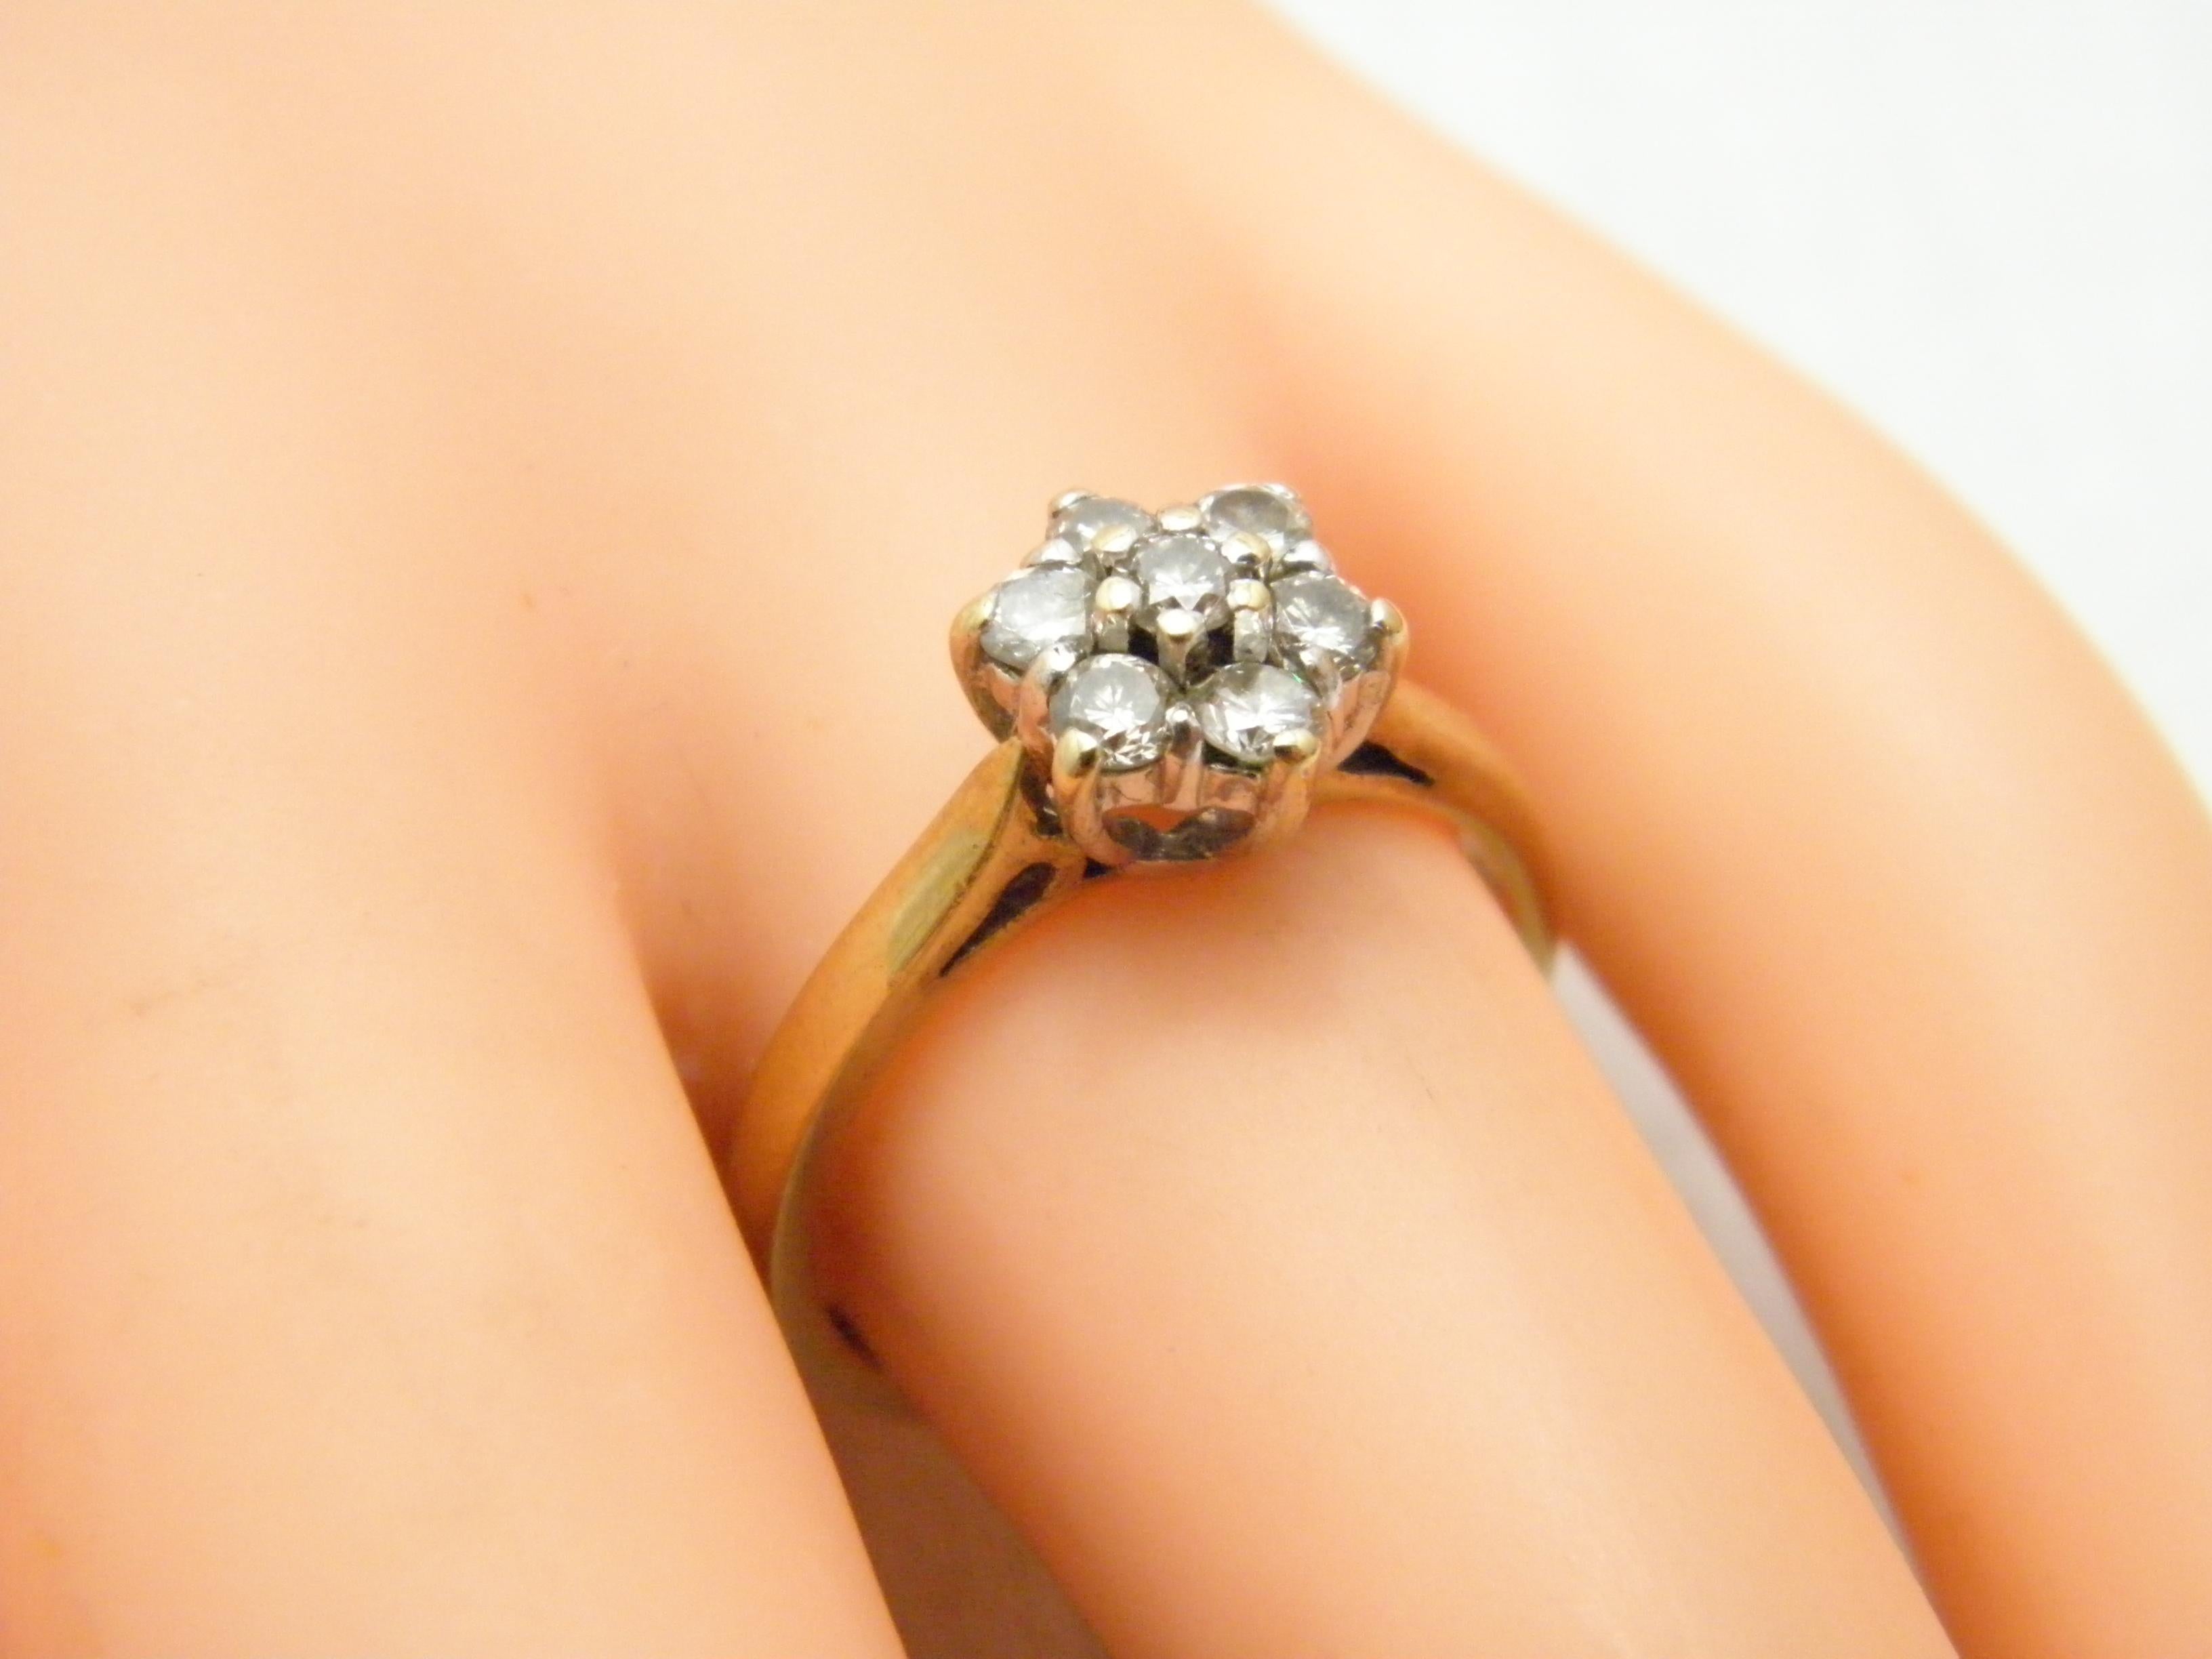 Vintage 9ct Gold 0.5Cttw Diamond Daisy Cluster Engagement Ring Size N 6.75 375 For Sale 2